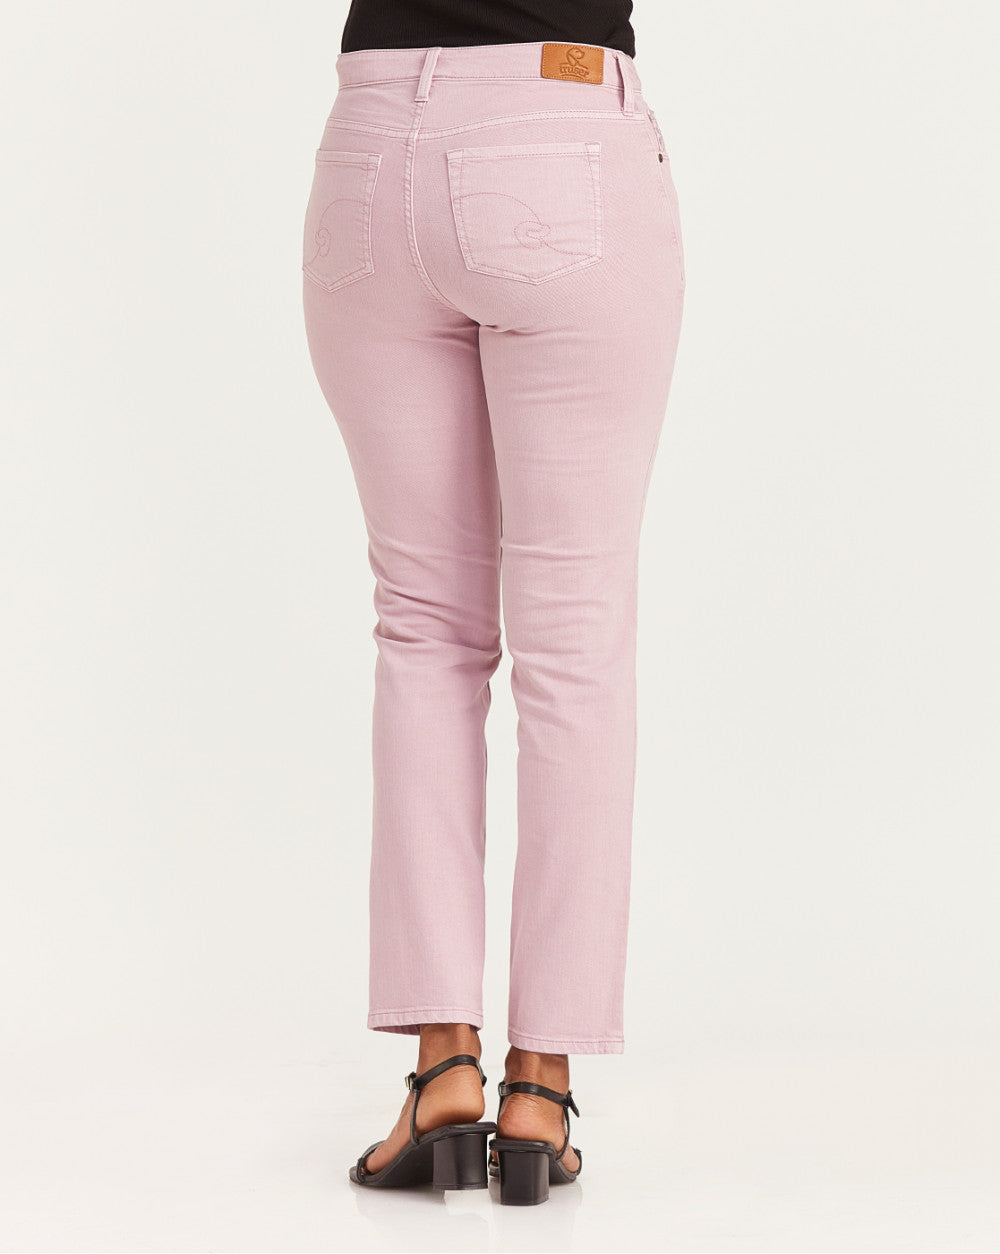 Slim Fit Mid Waist Colored Jeans - Lush Lilac